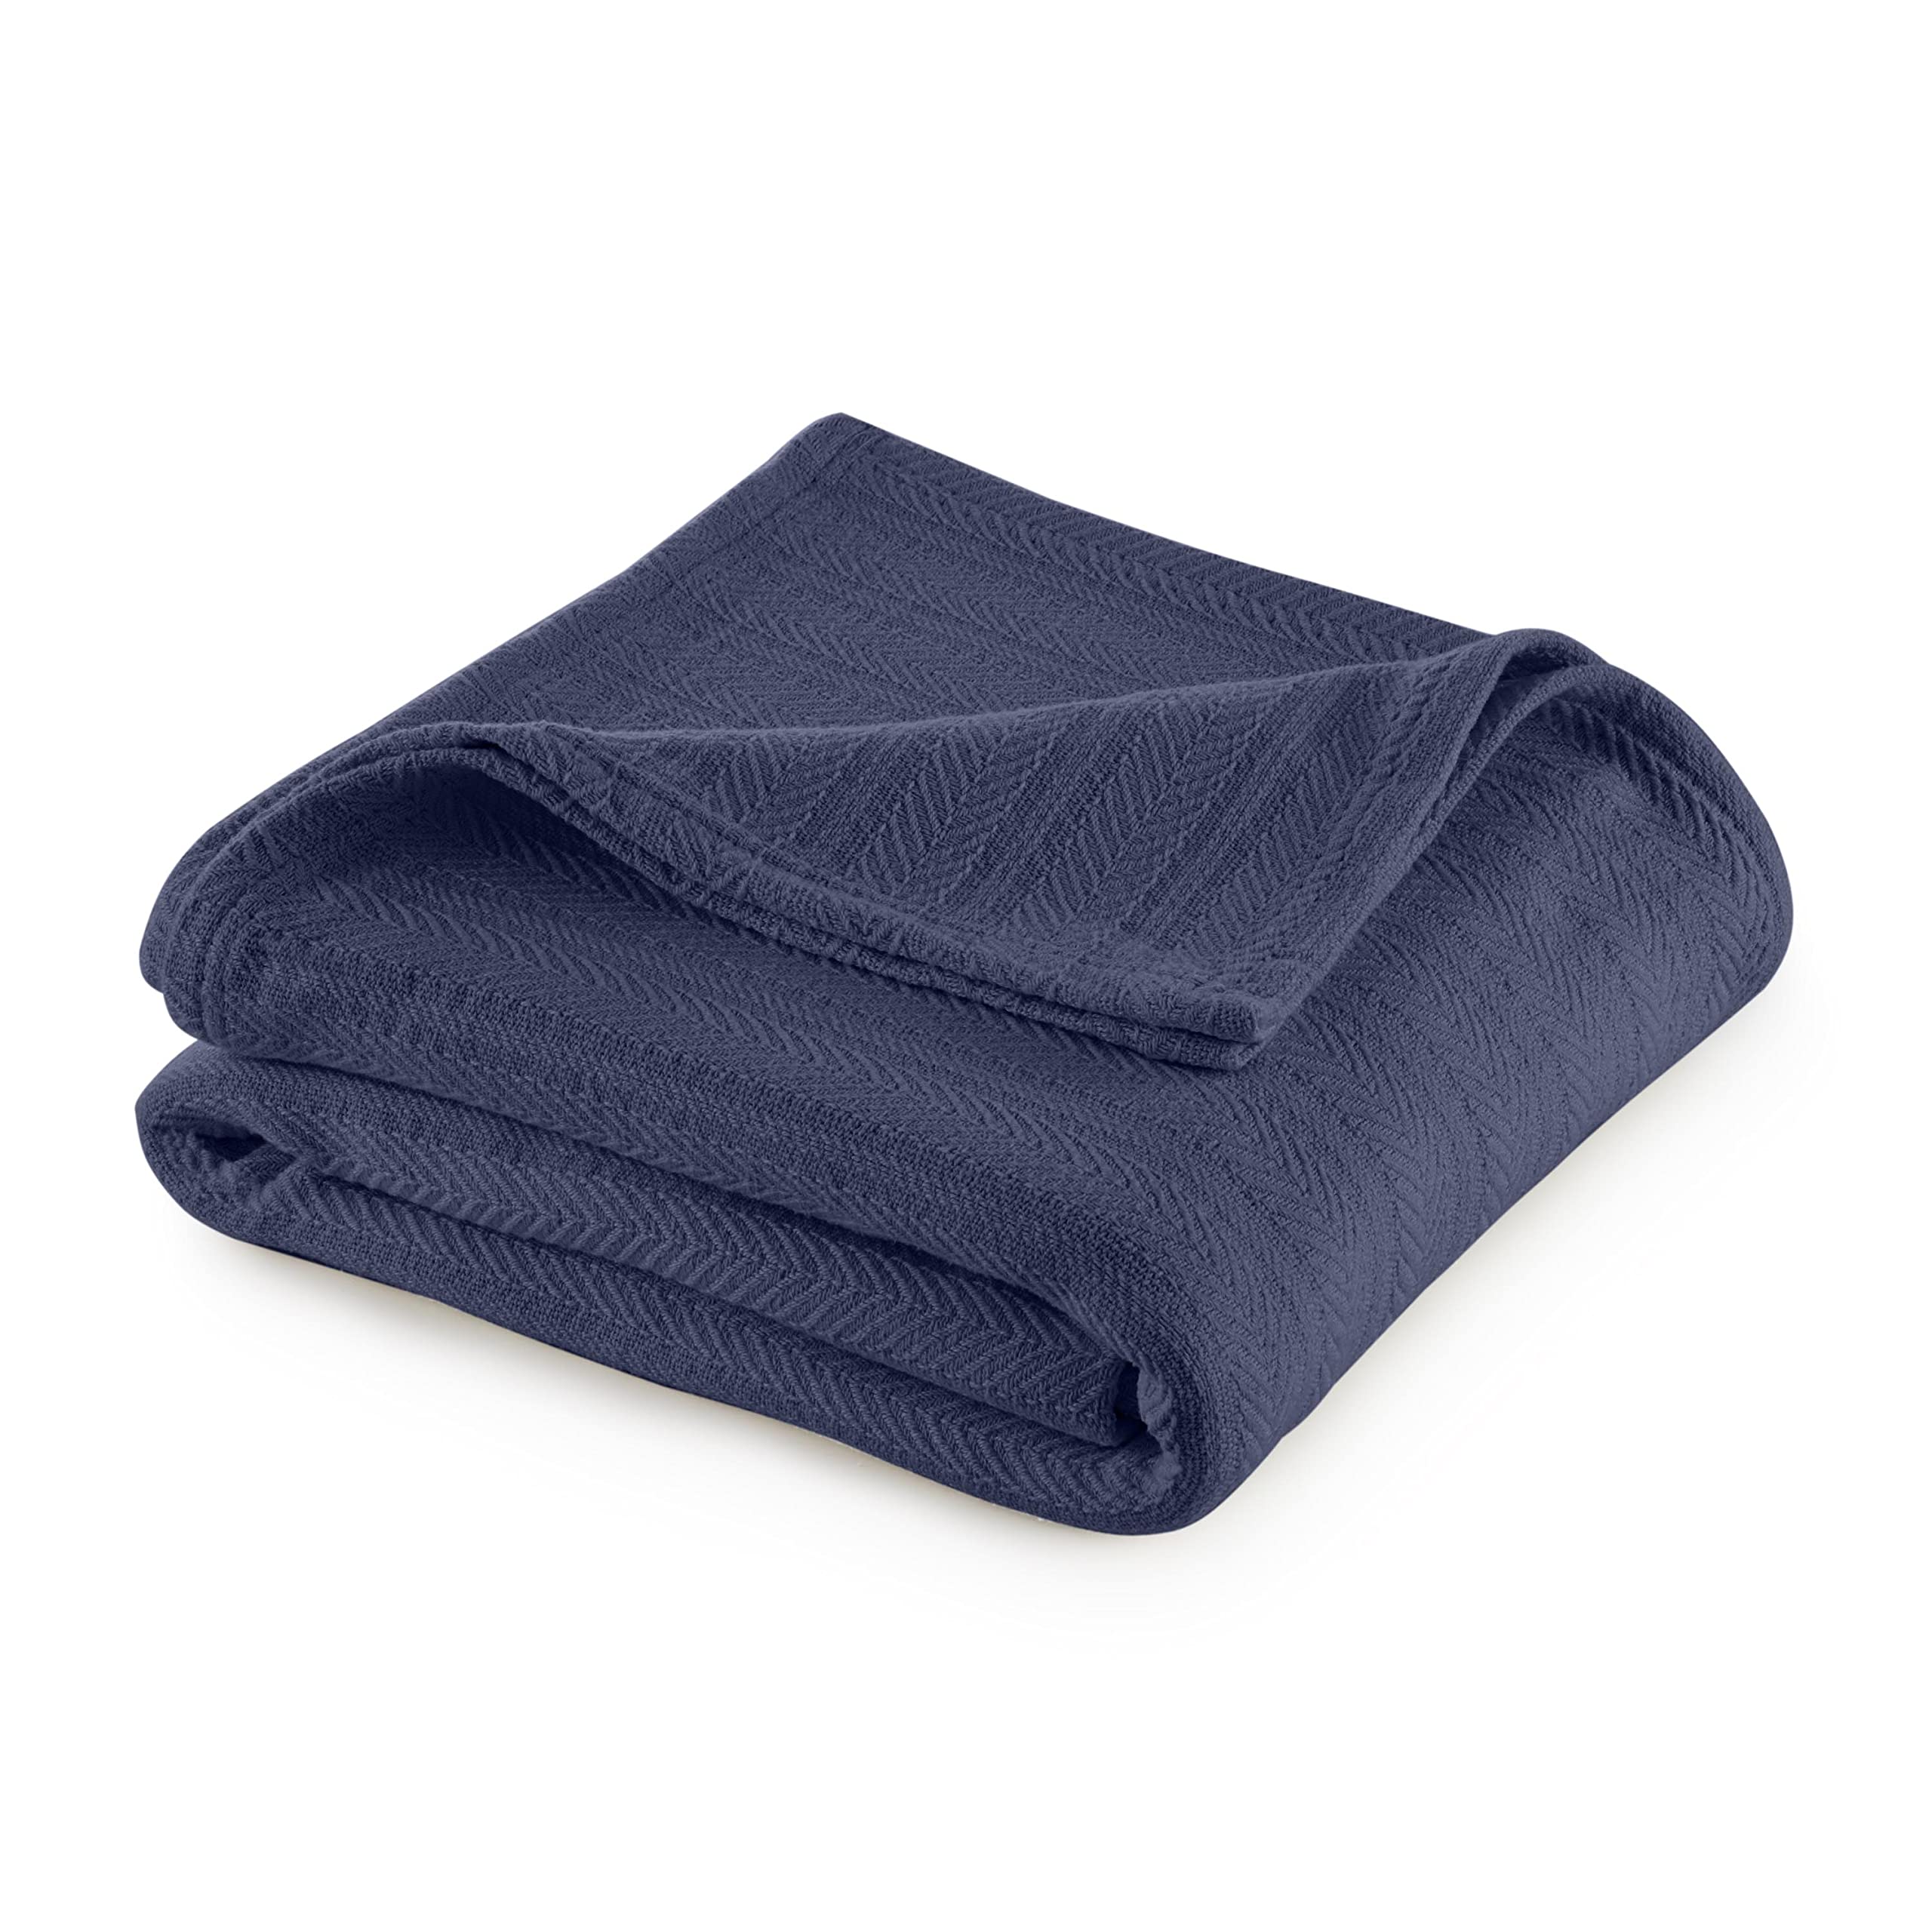 Vellux 100% Cotton Blanket - 360 GSM Soft, Breathable, Cozy & Lightweight Thermal Blanket - All Season Twin Size Blanket Perfect